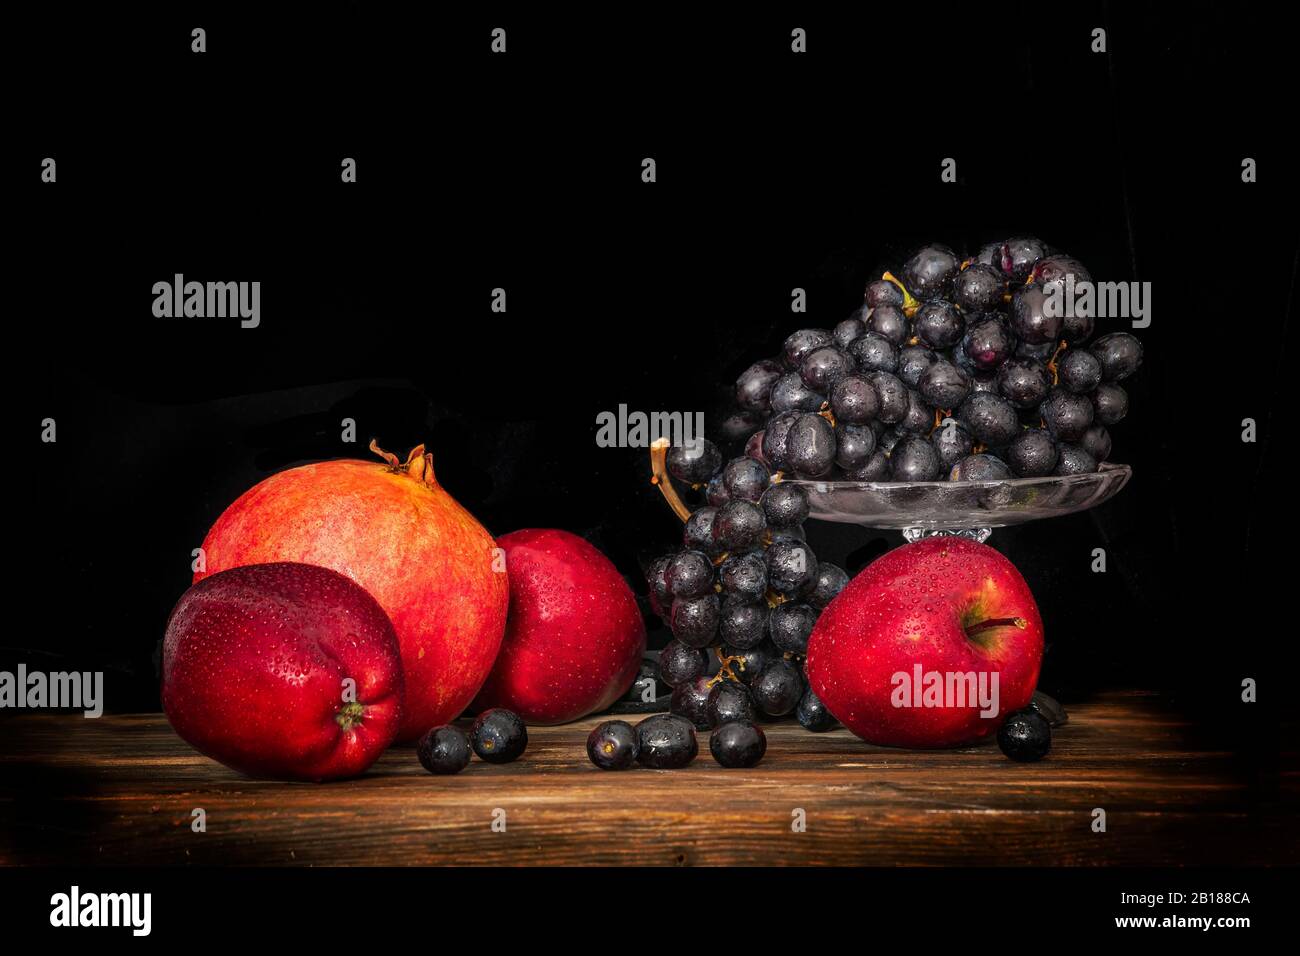 Still life apples, black grapes and pomegranate on a wooden surface and on a black background Stock Photo